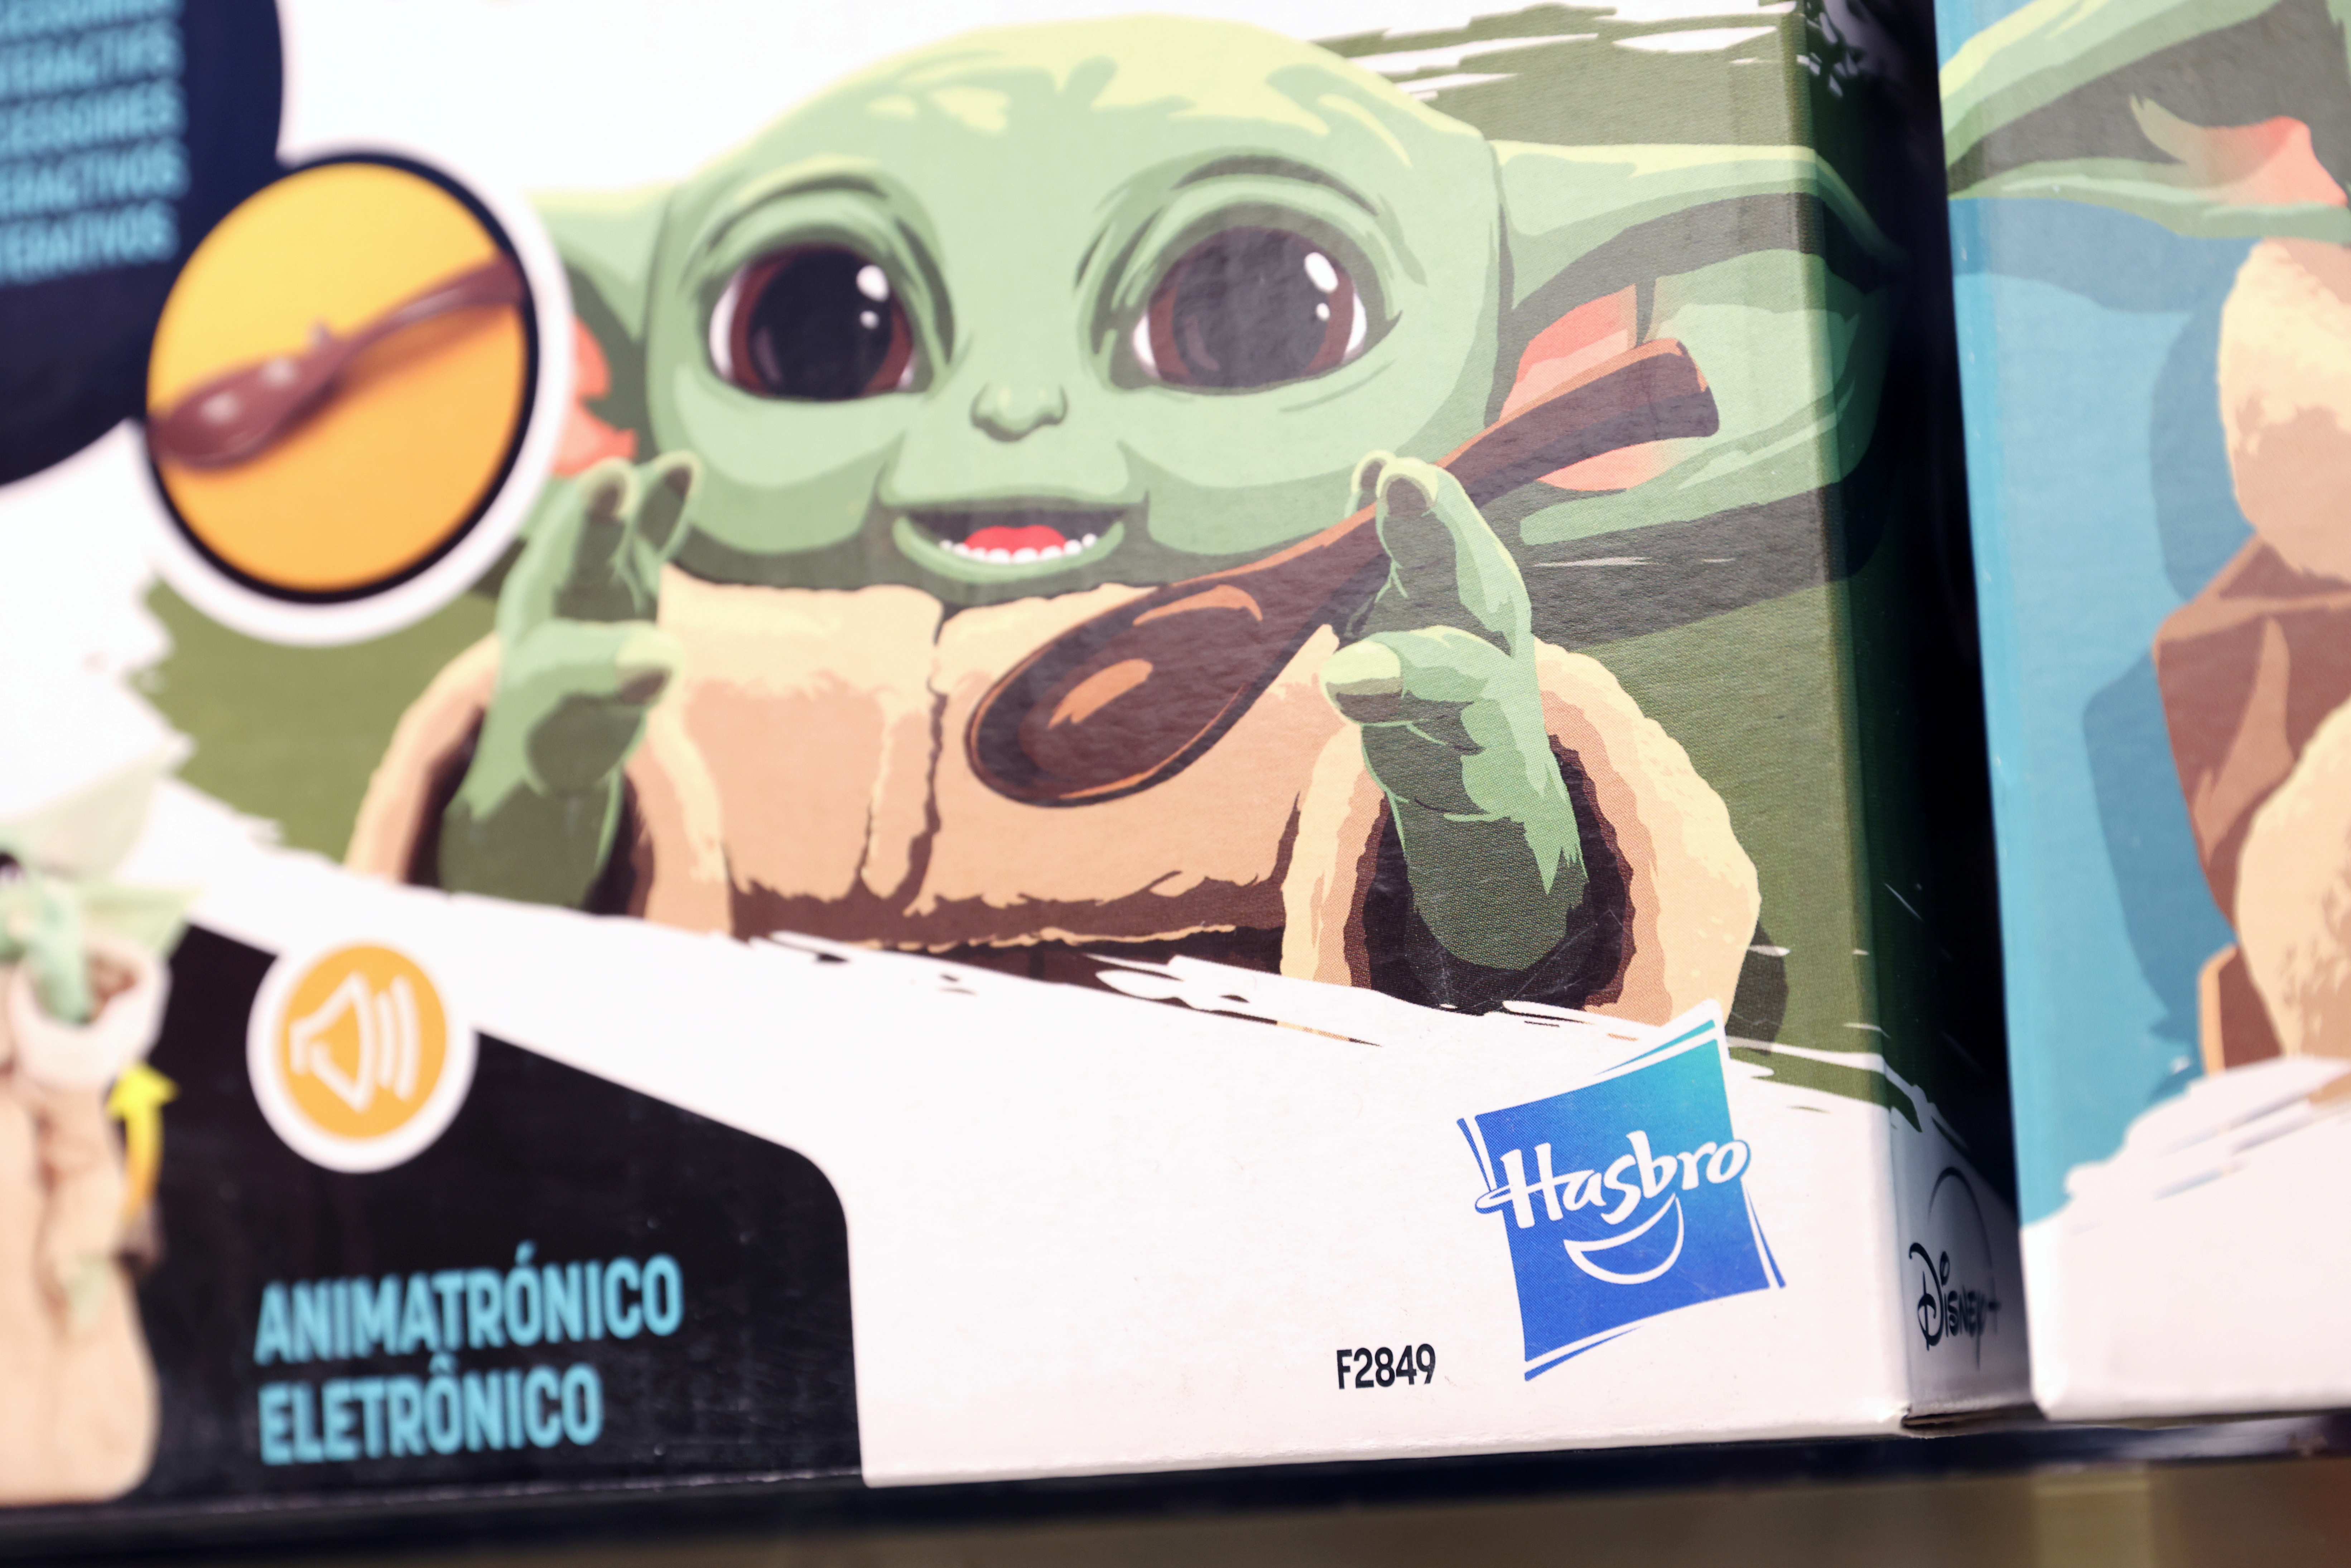 The Hasbro, Inc. logo is seen on the Star Wars Galactic Snackin Grogu toy in the FAO Schwarz toy store in Manhattan, New York City